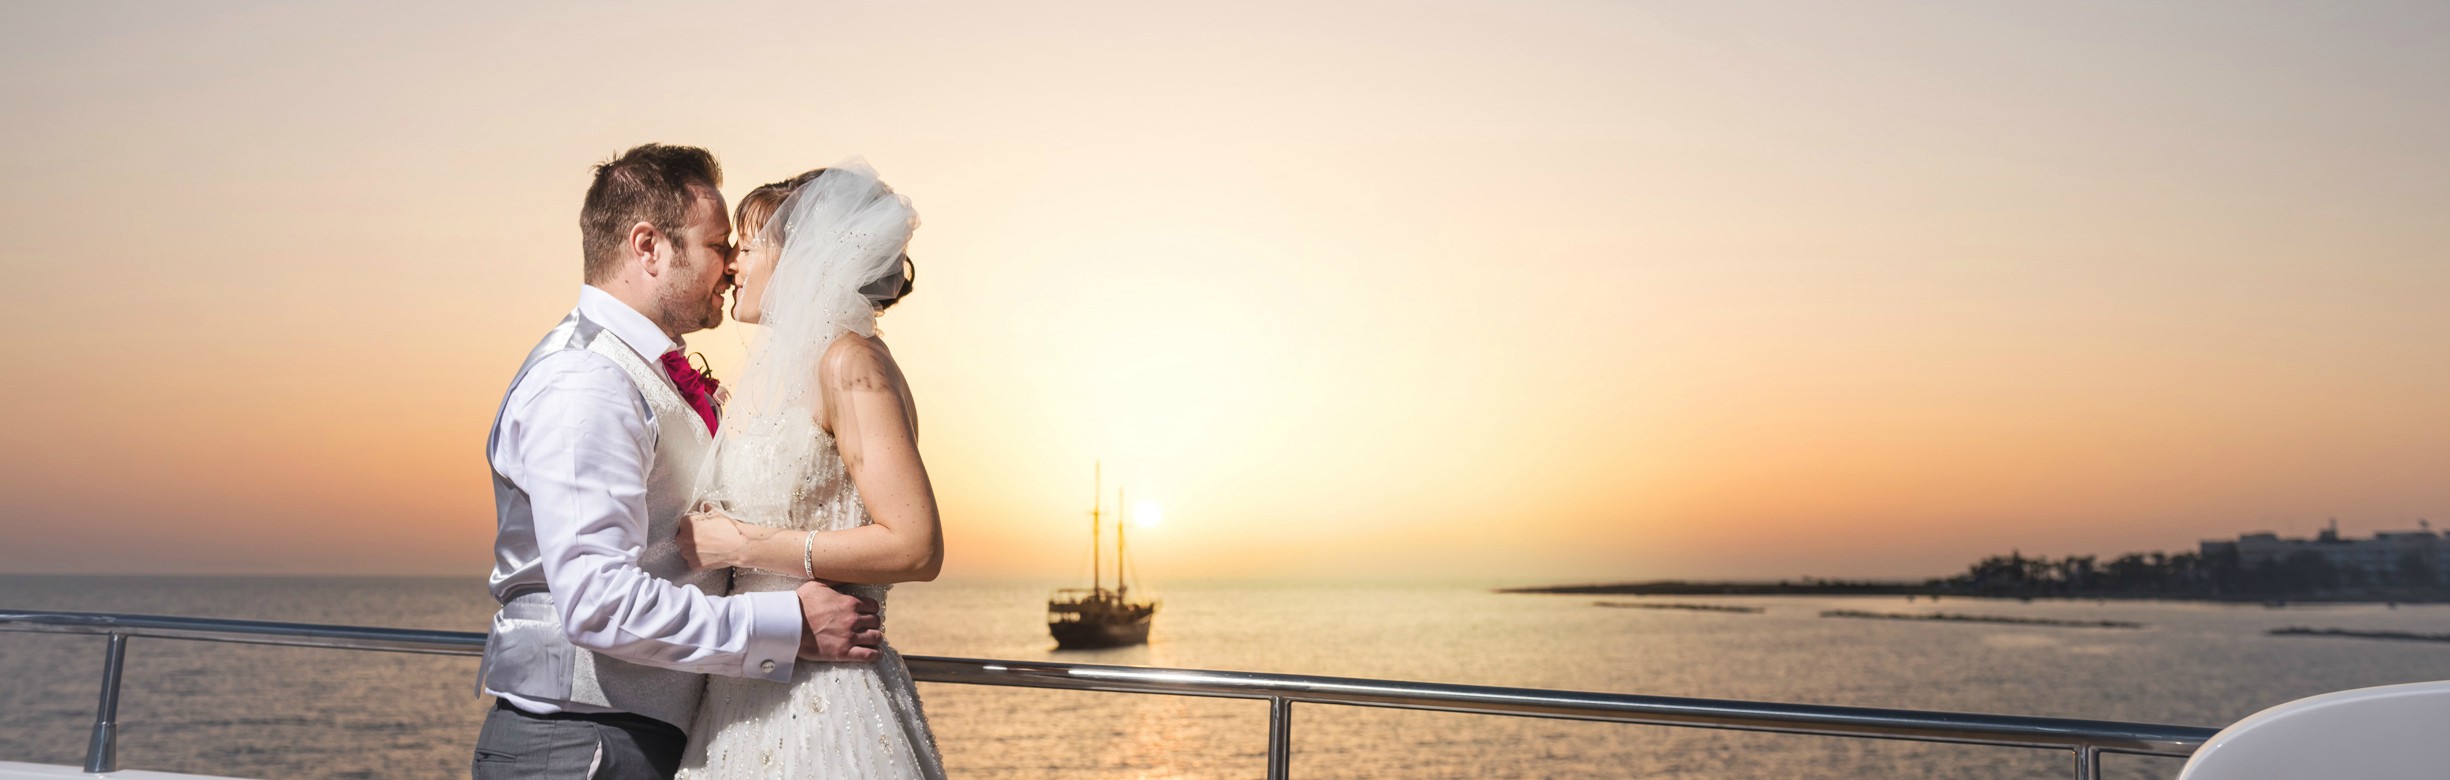 Book your wedding day in An Exclusive Yacht Wedding – “Sea Star”- Paphos